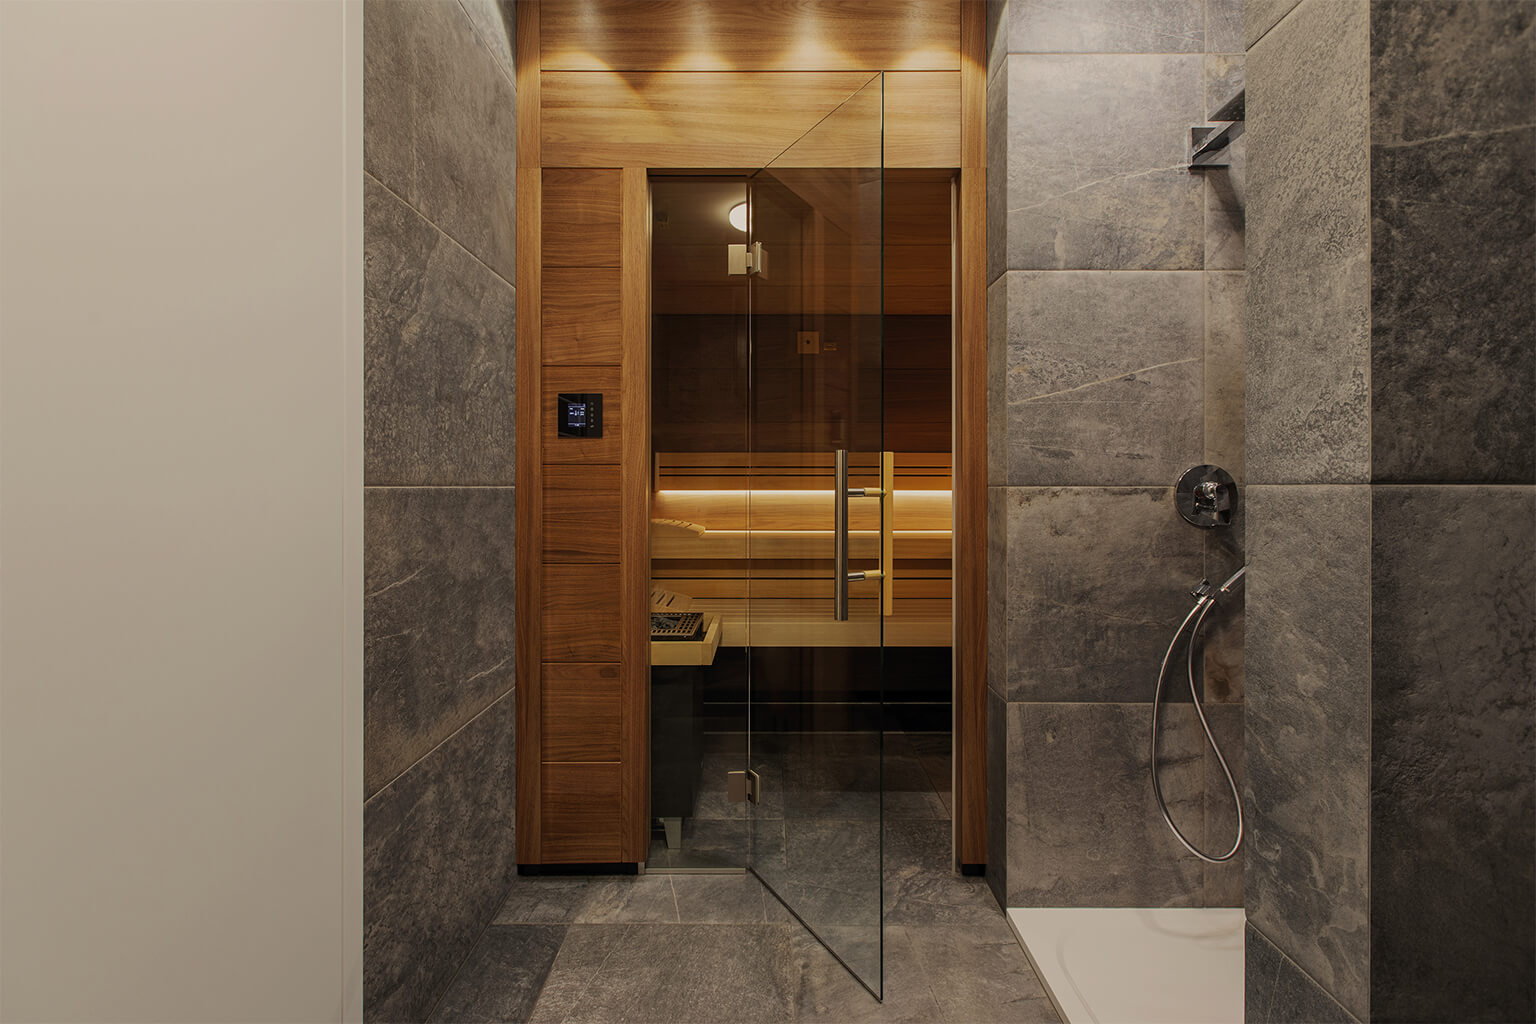 How to choose your sauna? Go through all the important decisions with us